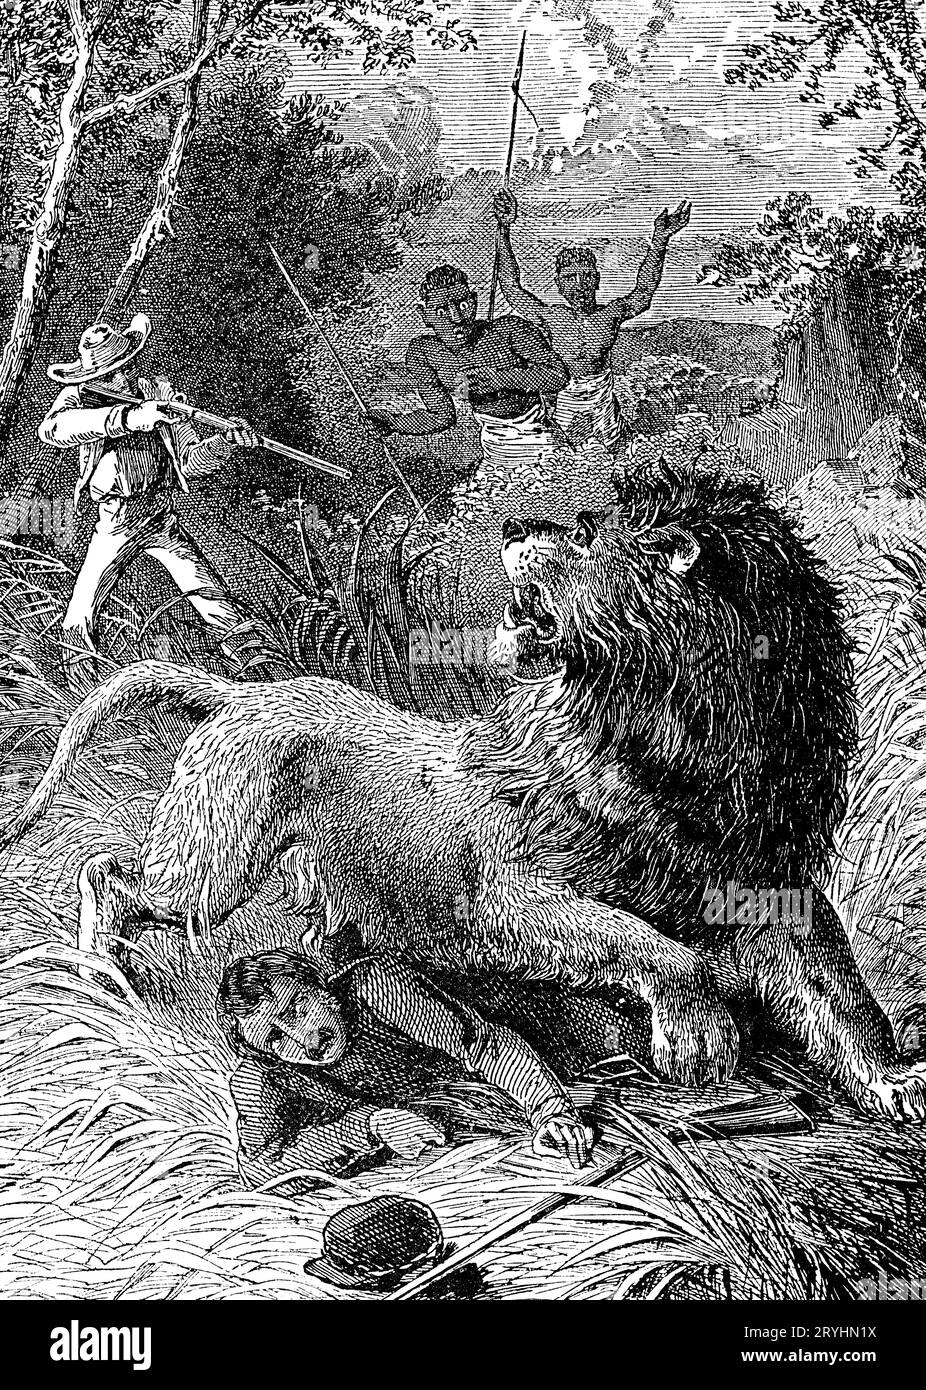 David Livingstone and the lion, 1844. On 16th February 1844, Mebalwe and missionary David Livingstone (1813-1873), joined Mabotsa villagers in defending their sheep from lions. Livingstone got a clear shot at a large lion, but while he was re-loading it attacked, crushing his left arm, and forced him to the ground. His life was saved by Mebalwe diverting its attention by trying to shoot the lion. He too got bitten. A man who tried spearing it was attacked just before it dropped dead. Stock Photo